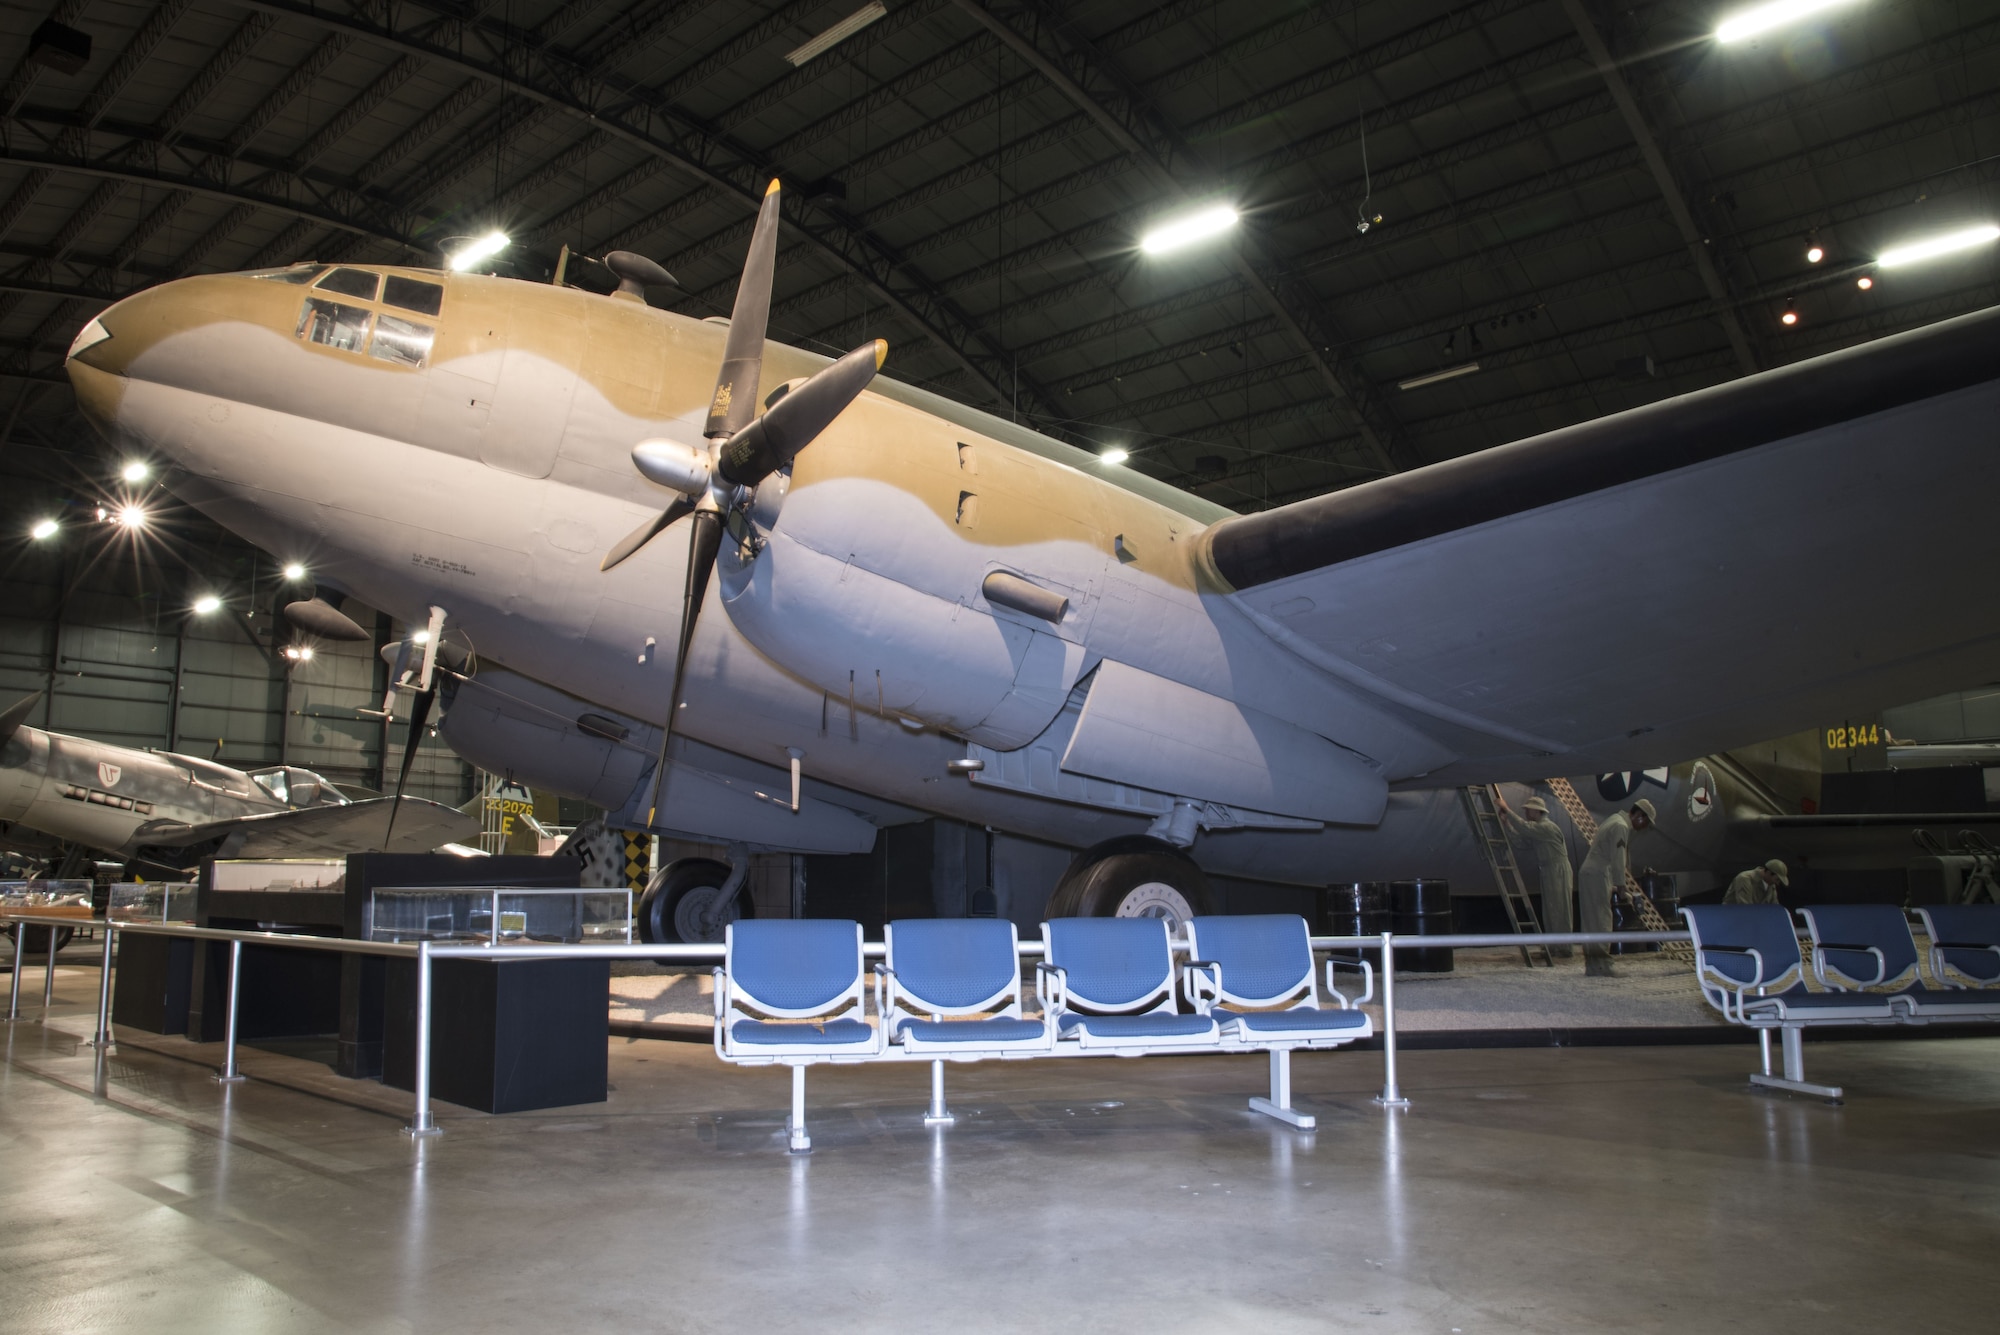 DAYTON, Ohio -- Curtiss C-46D Commando in the World War II Gallery at the National Museum of the United States Air Force. (U.S. Air Force photo)